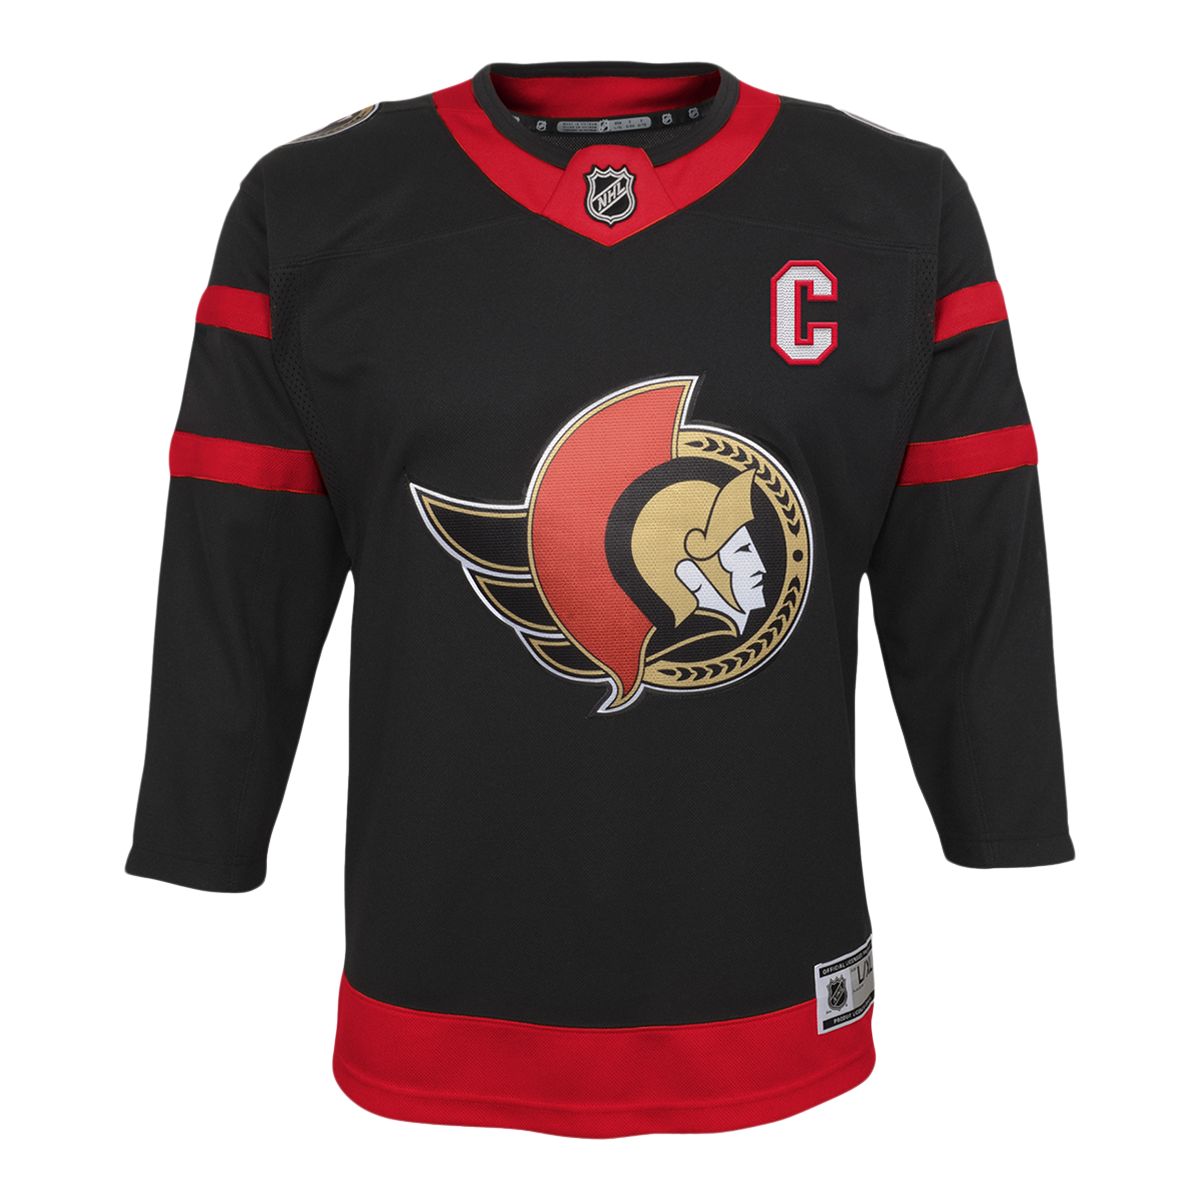 Officially Licensed 2023/24 Florida Panthers Kits, Shirts, Jerseys, & Tops